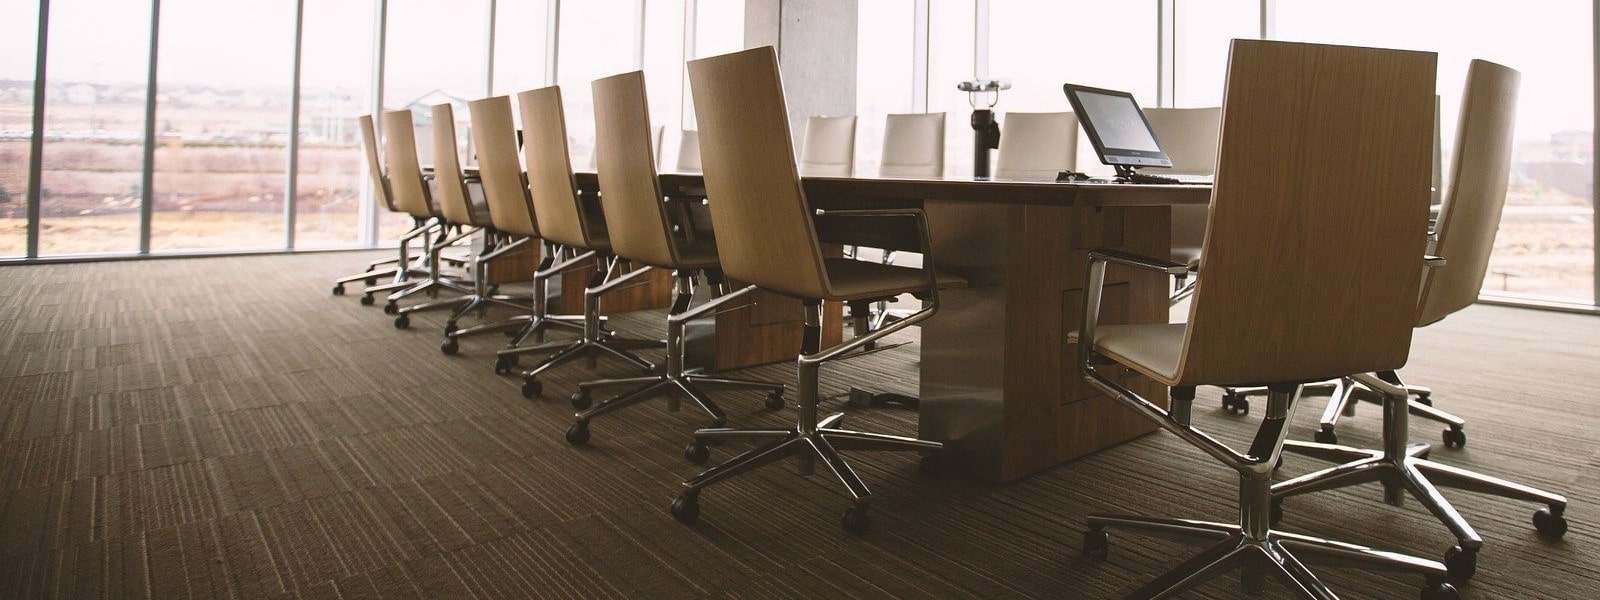 Conference table in a high rise office